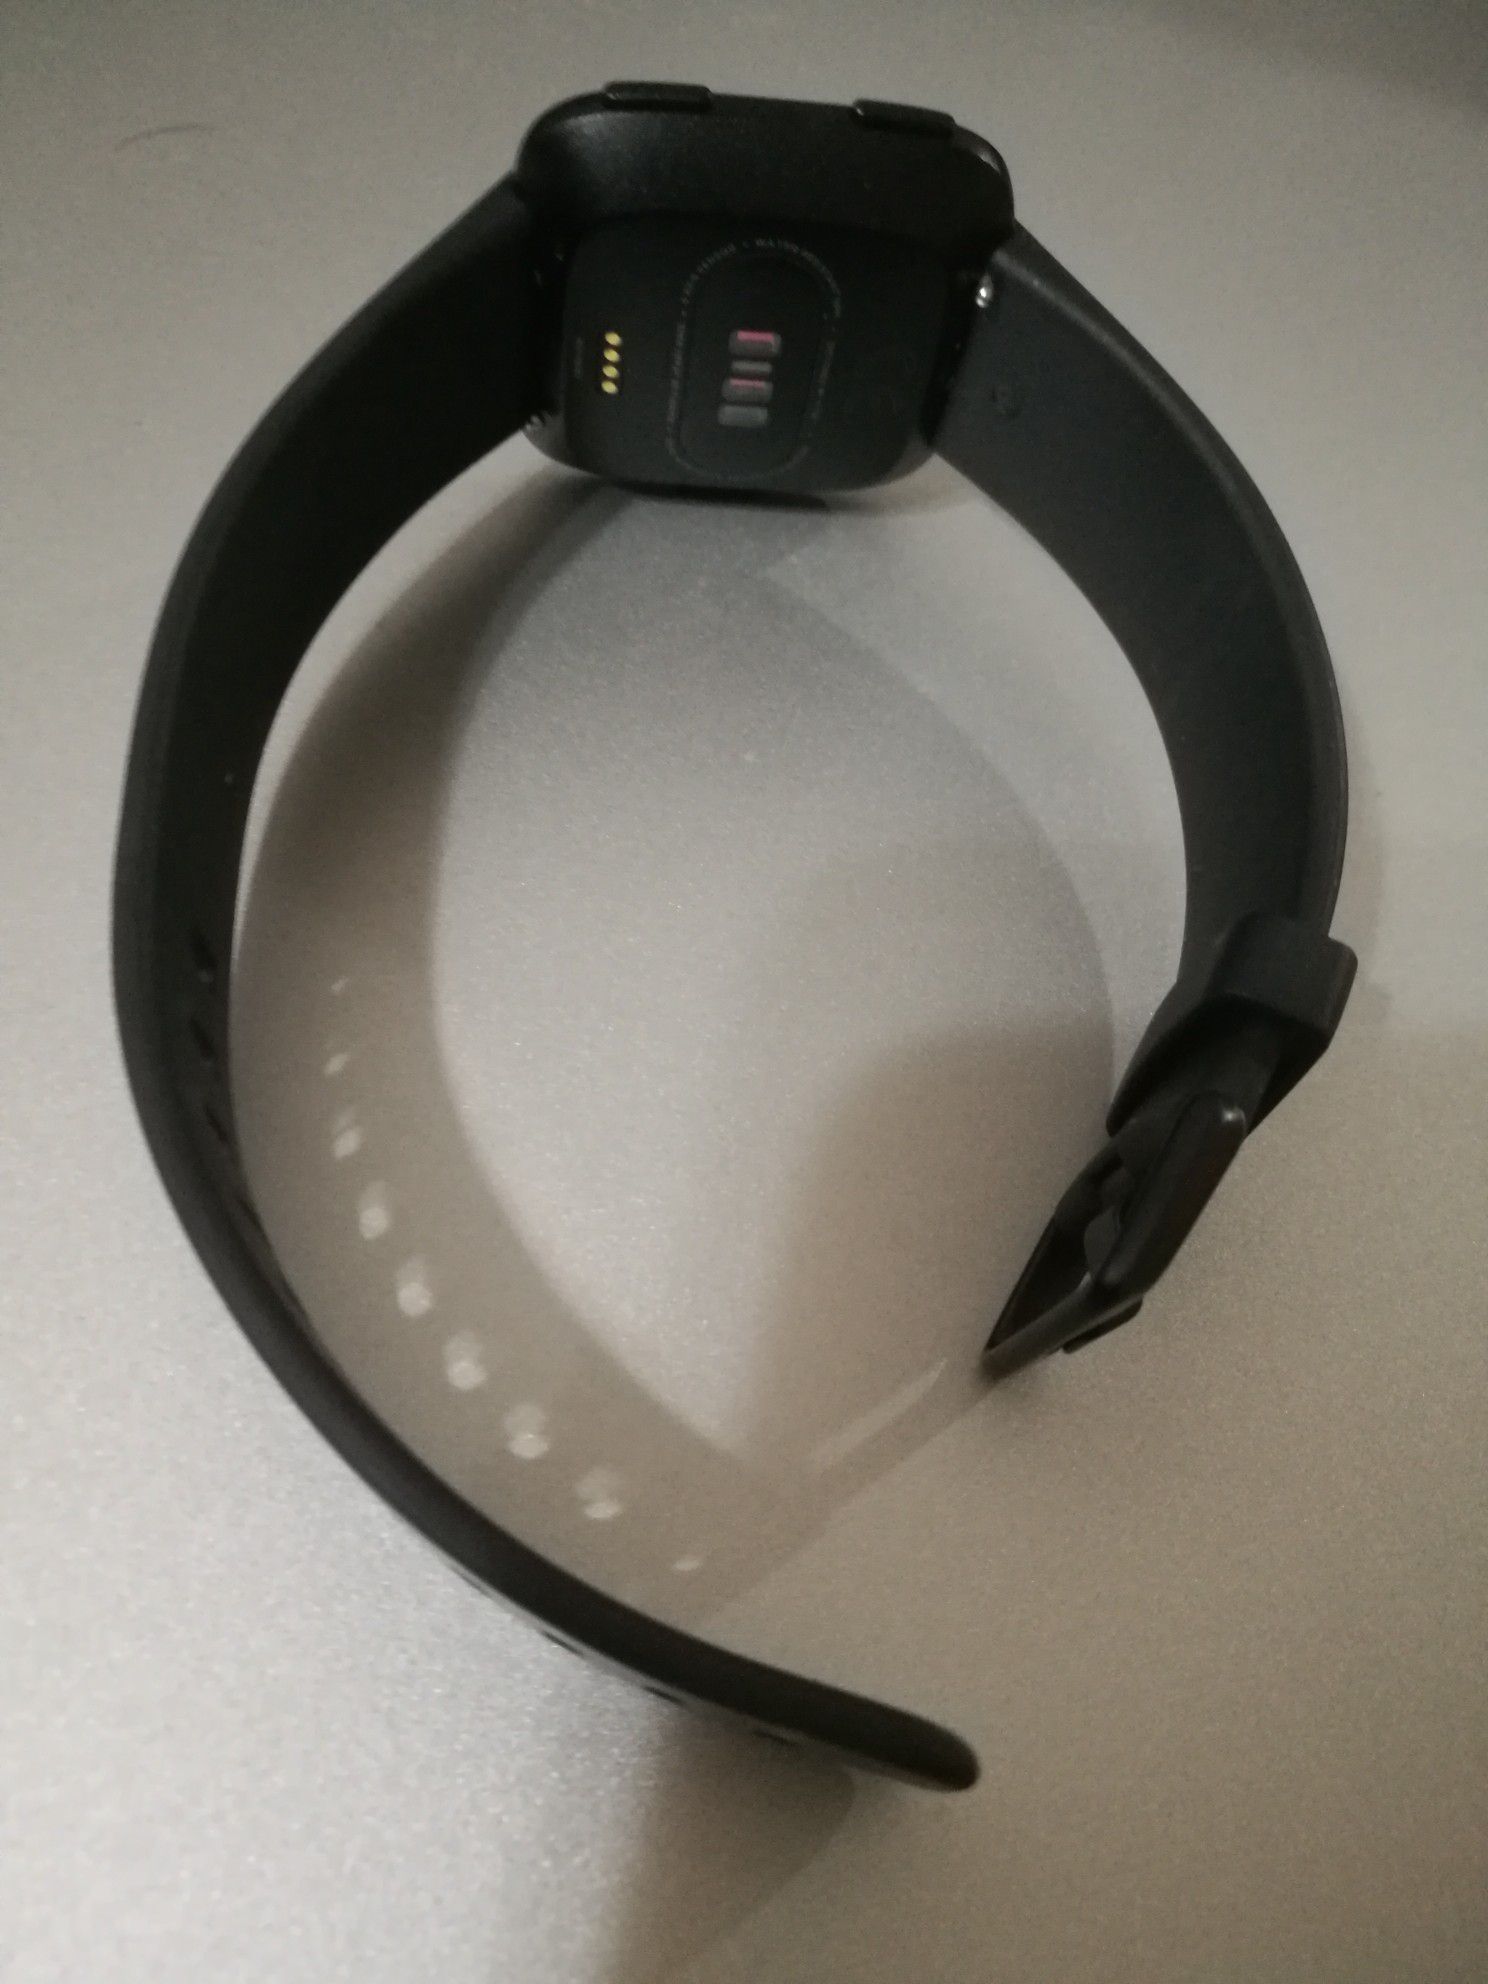 FitBit Versa , excellent condition, hardly used